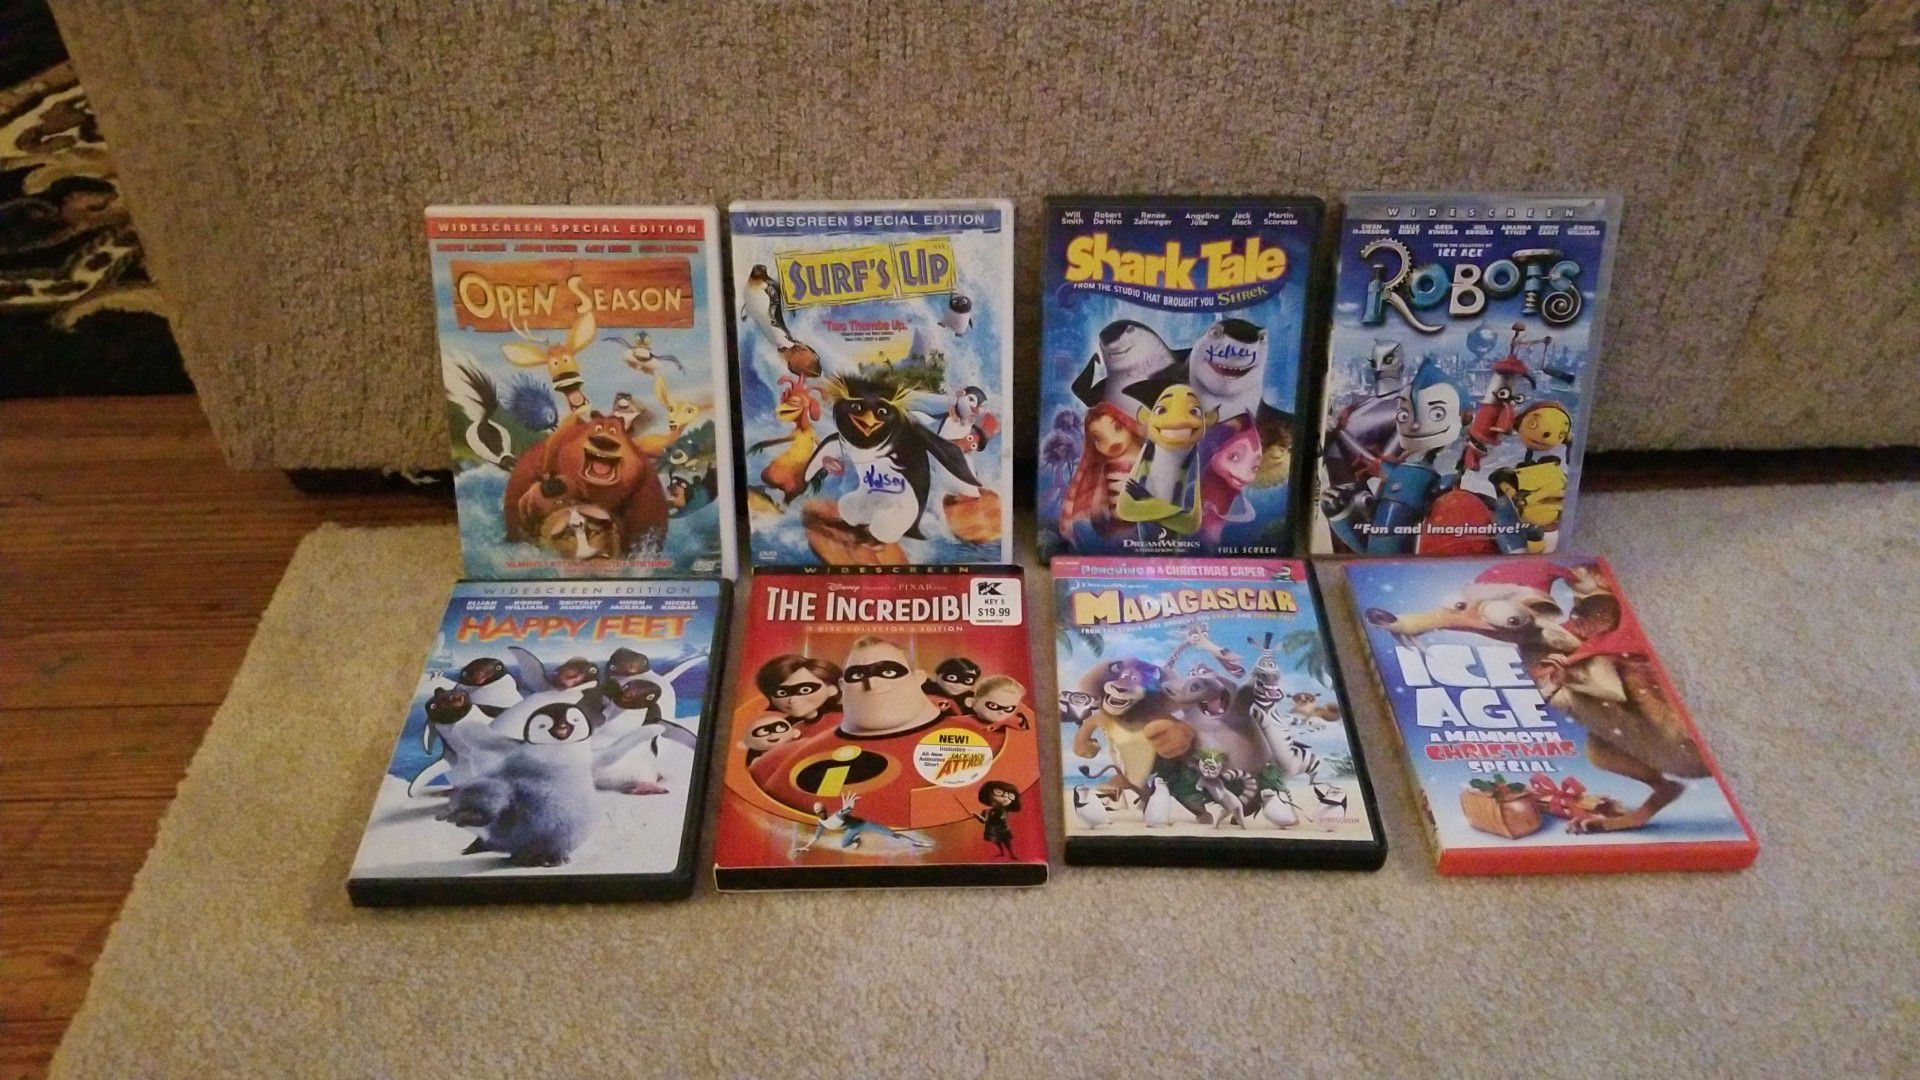 8 kids movies together @ $25.00 seperately @ $4.00 or negotiable